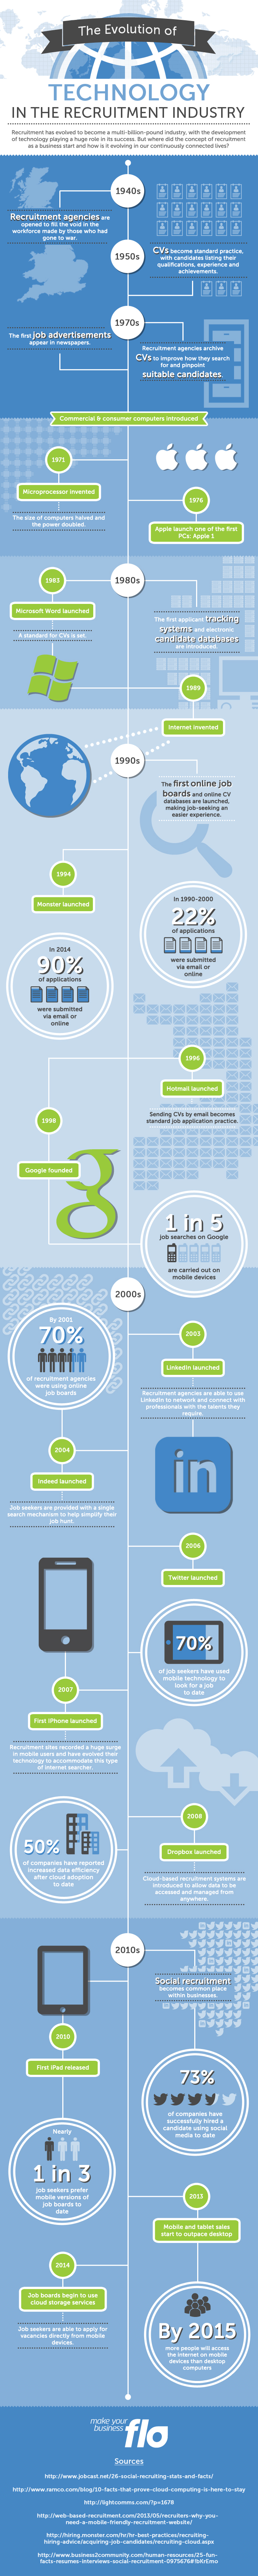 Evolution of Technology in the Recruitment Industry